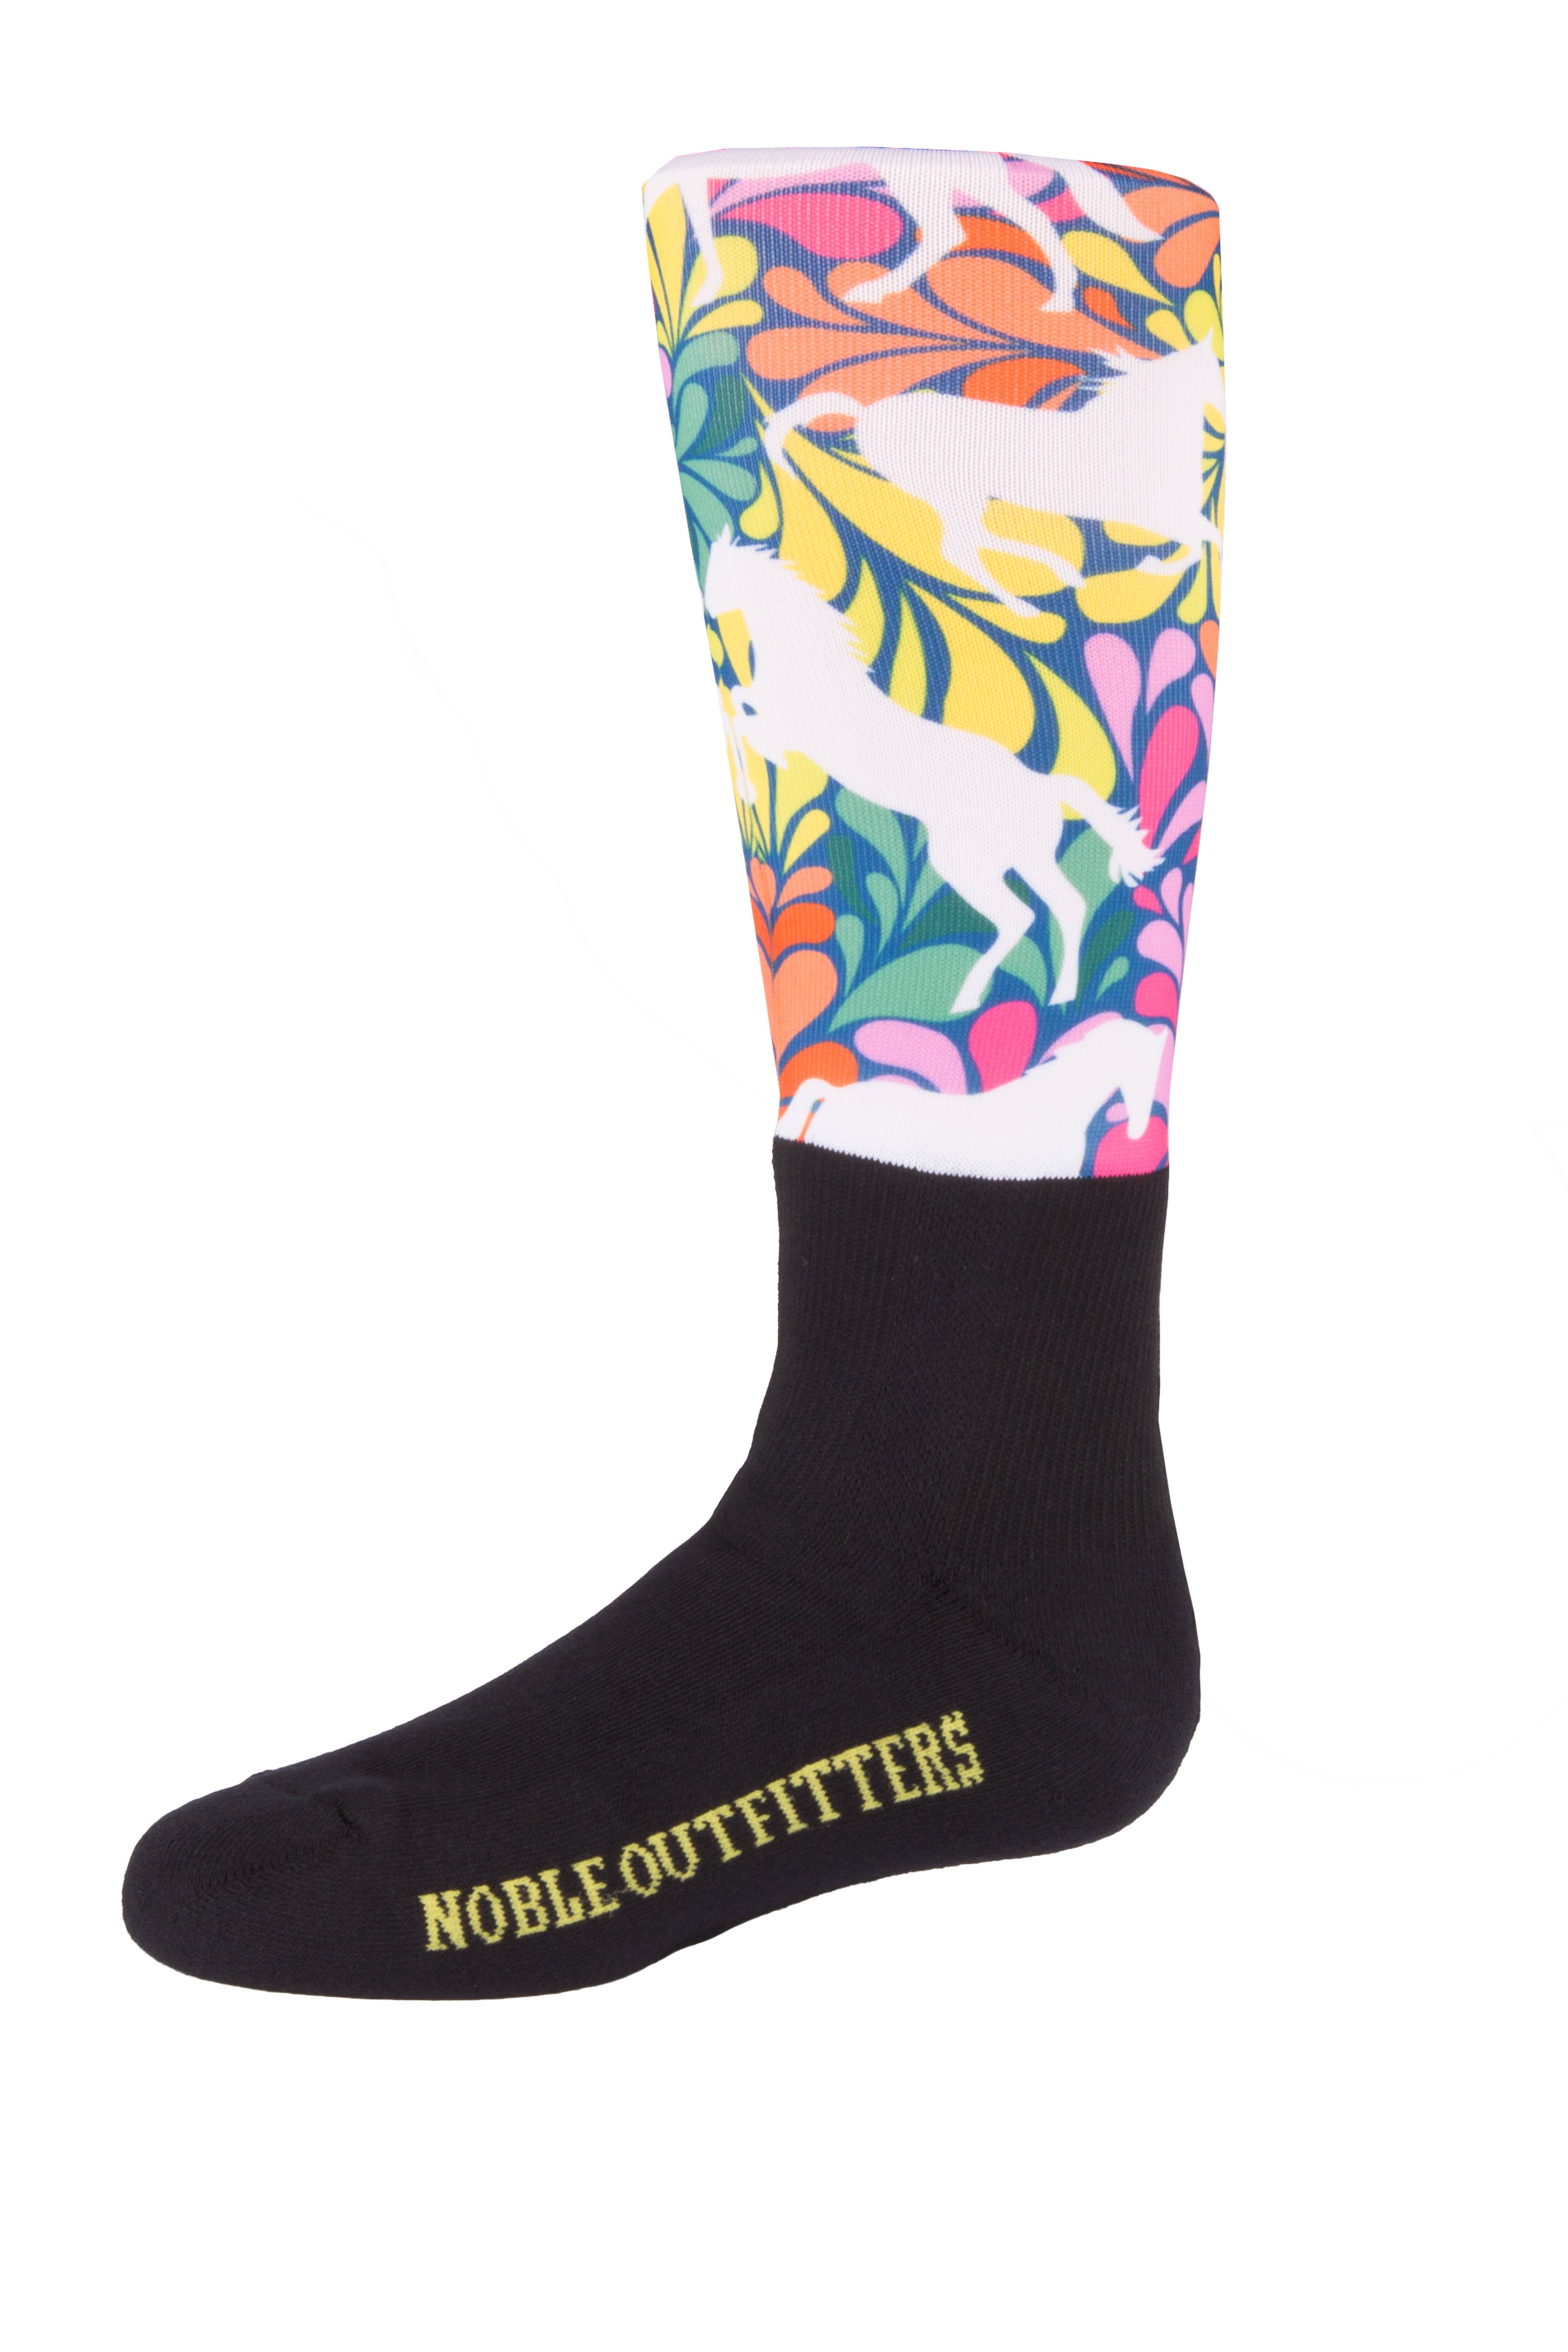 Noble Outfitters Girl's Kid's Over the Calf Riding English Tall Peddies Socks 